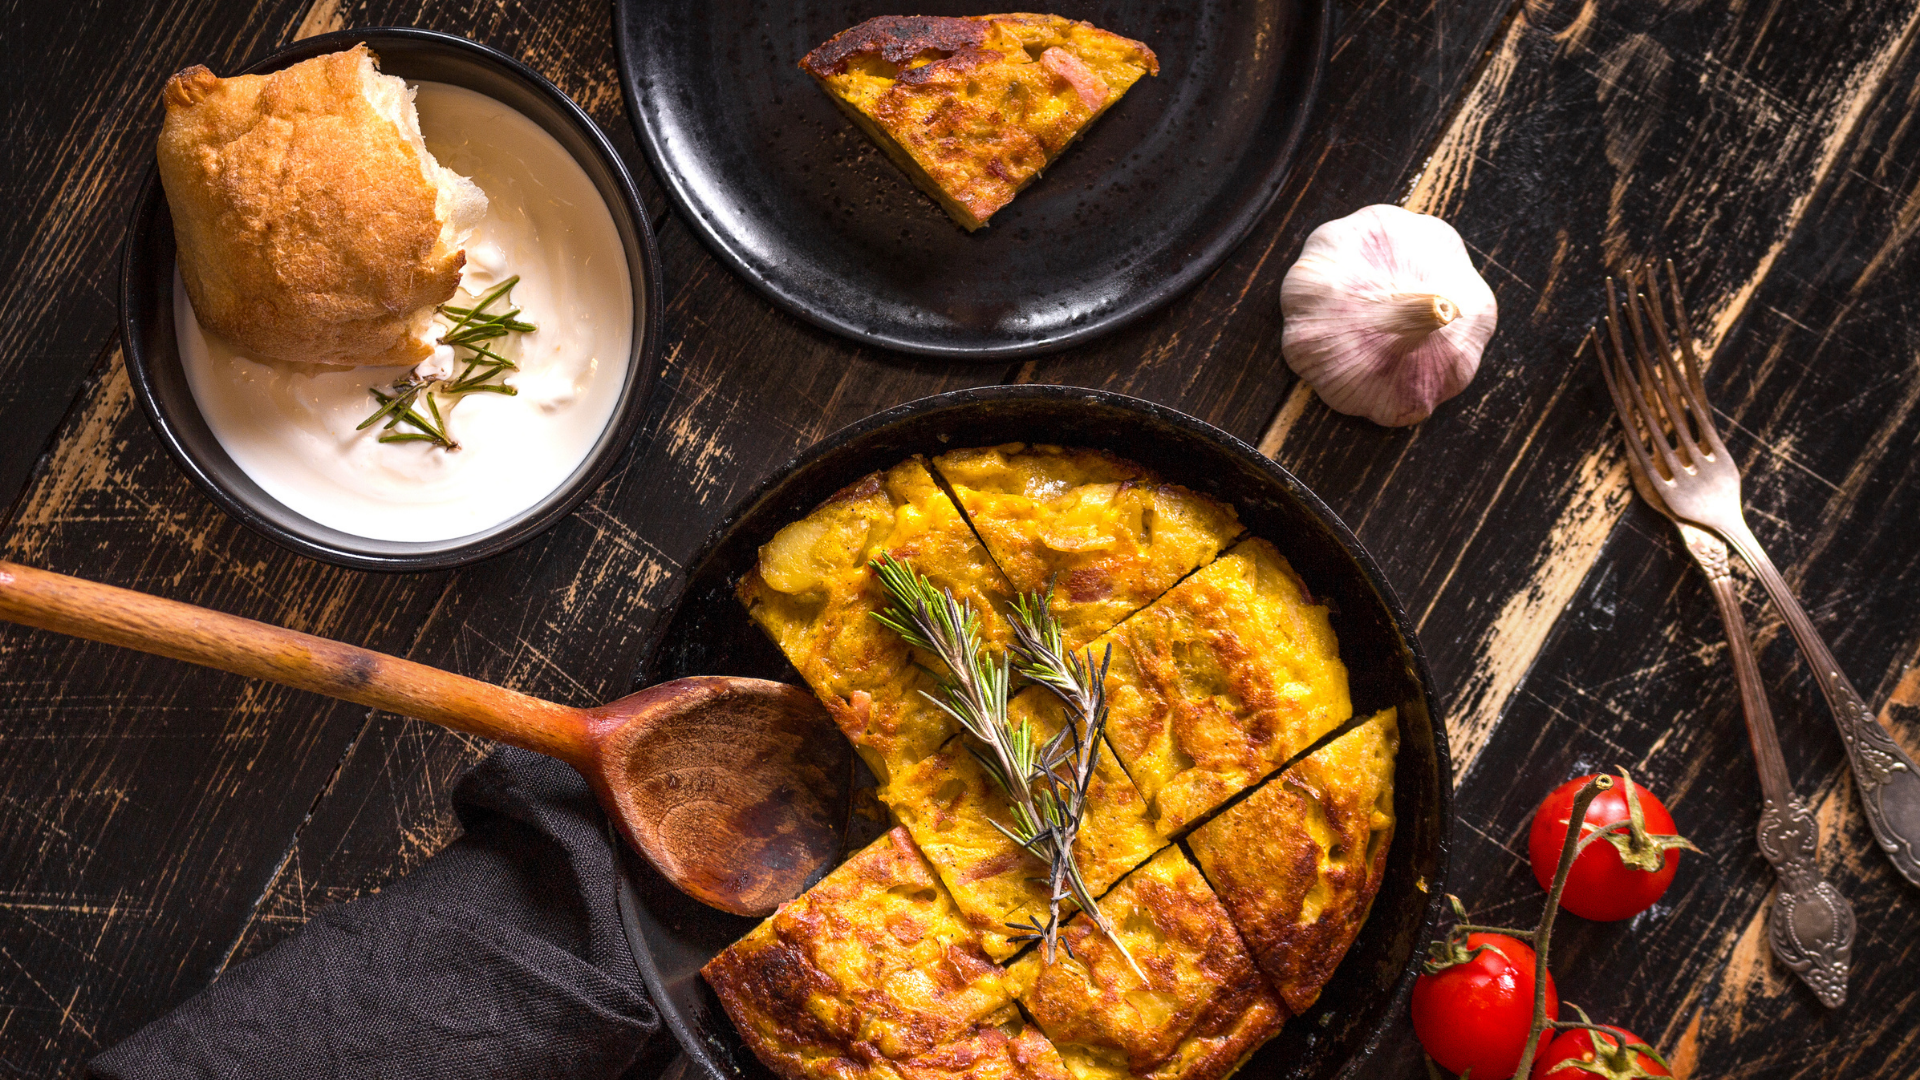 A History of the Tortilla Española and Its Use in Spain